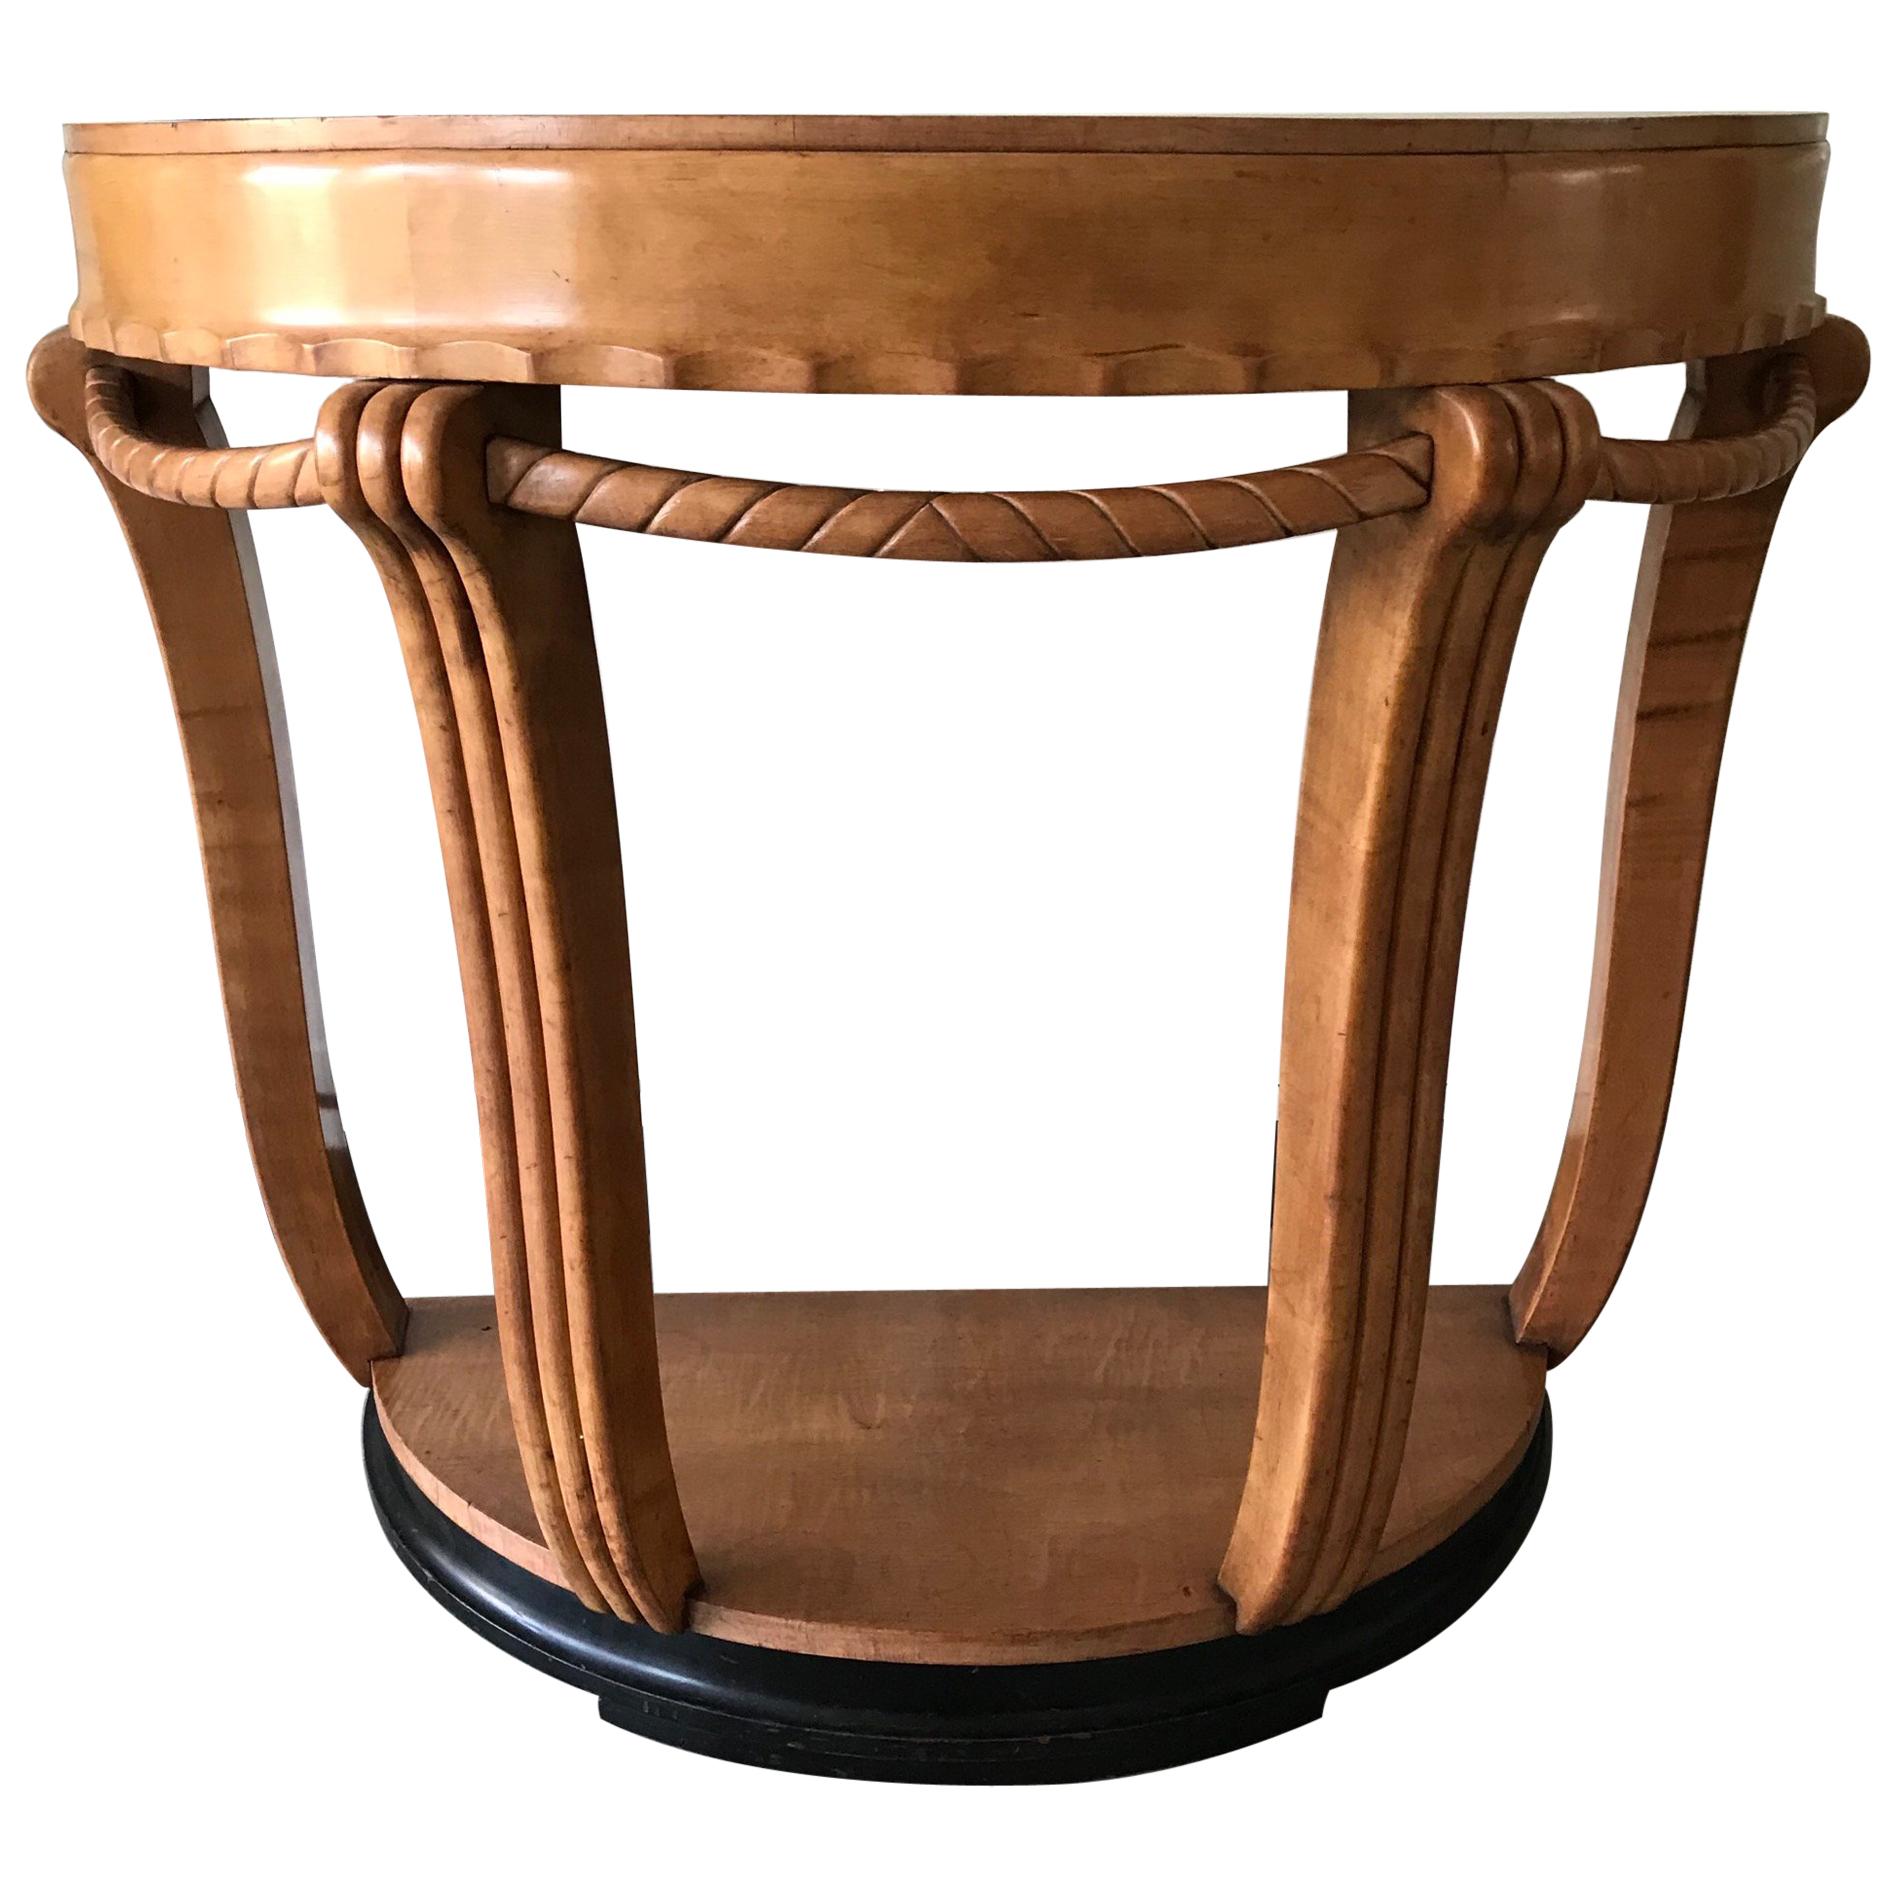 Large & Stylish Semi Circular Art Deco Console / Side Table of Stained Beechwood